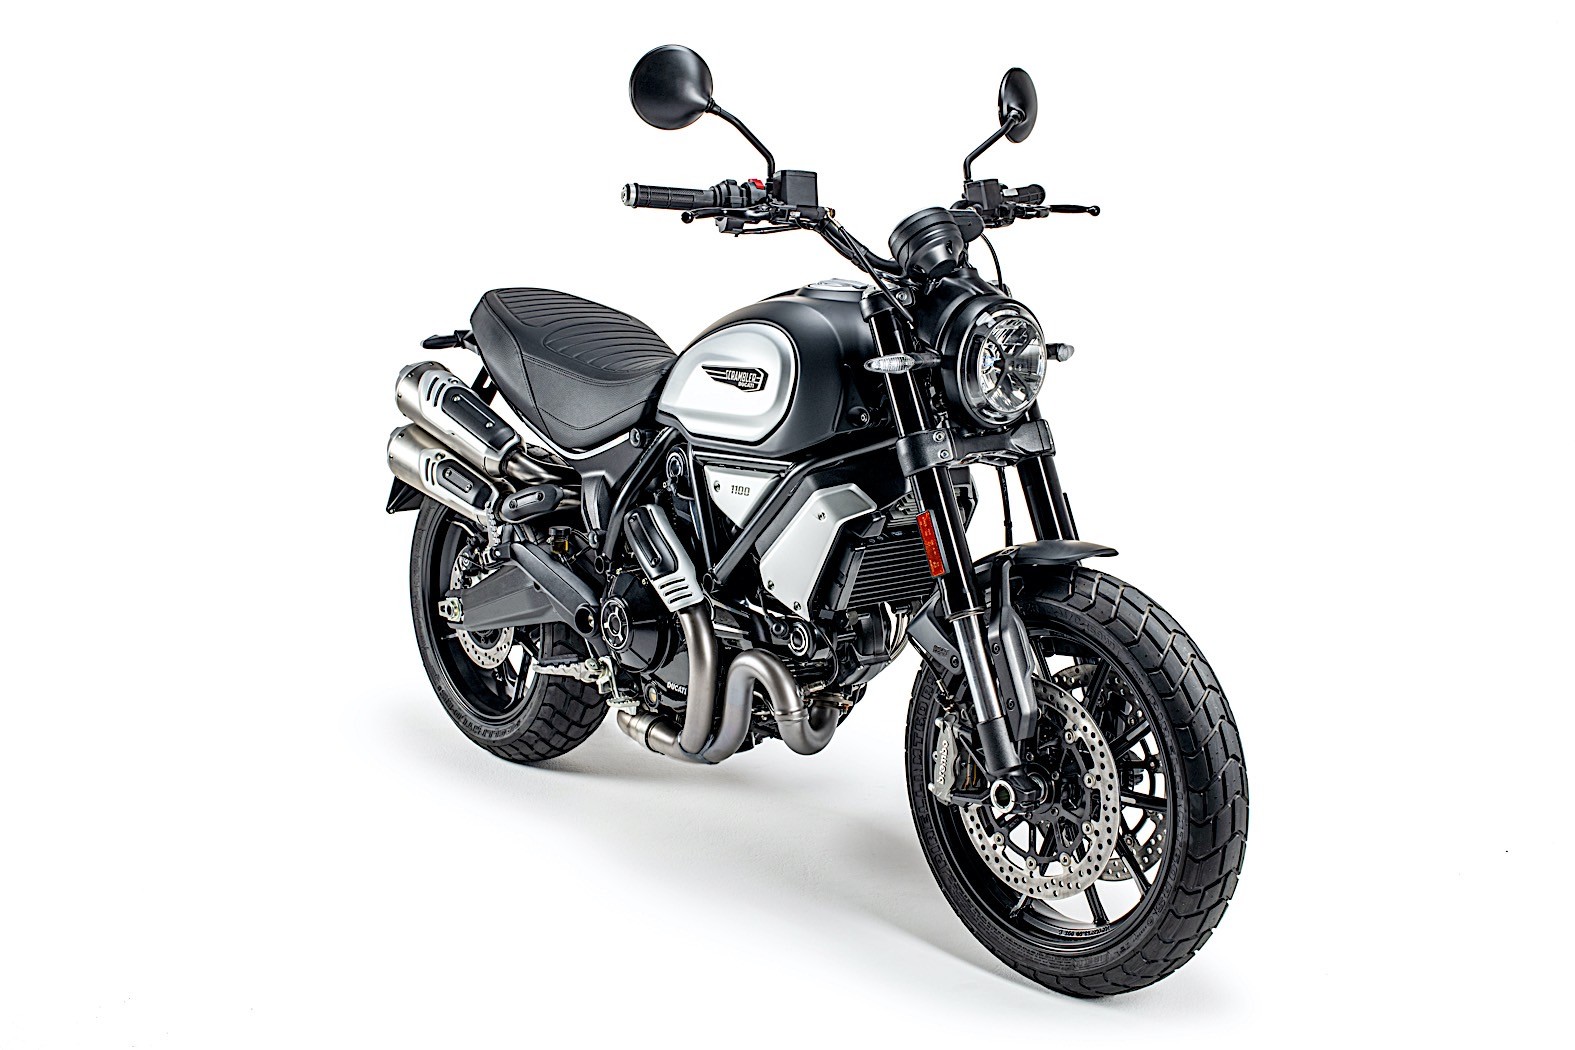 Ducati Scrambler 1100 Dark PRO Is All About Black Color Play